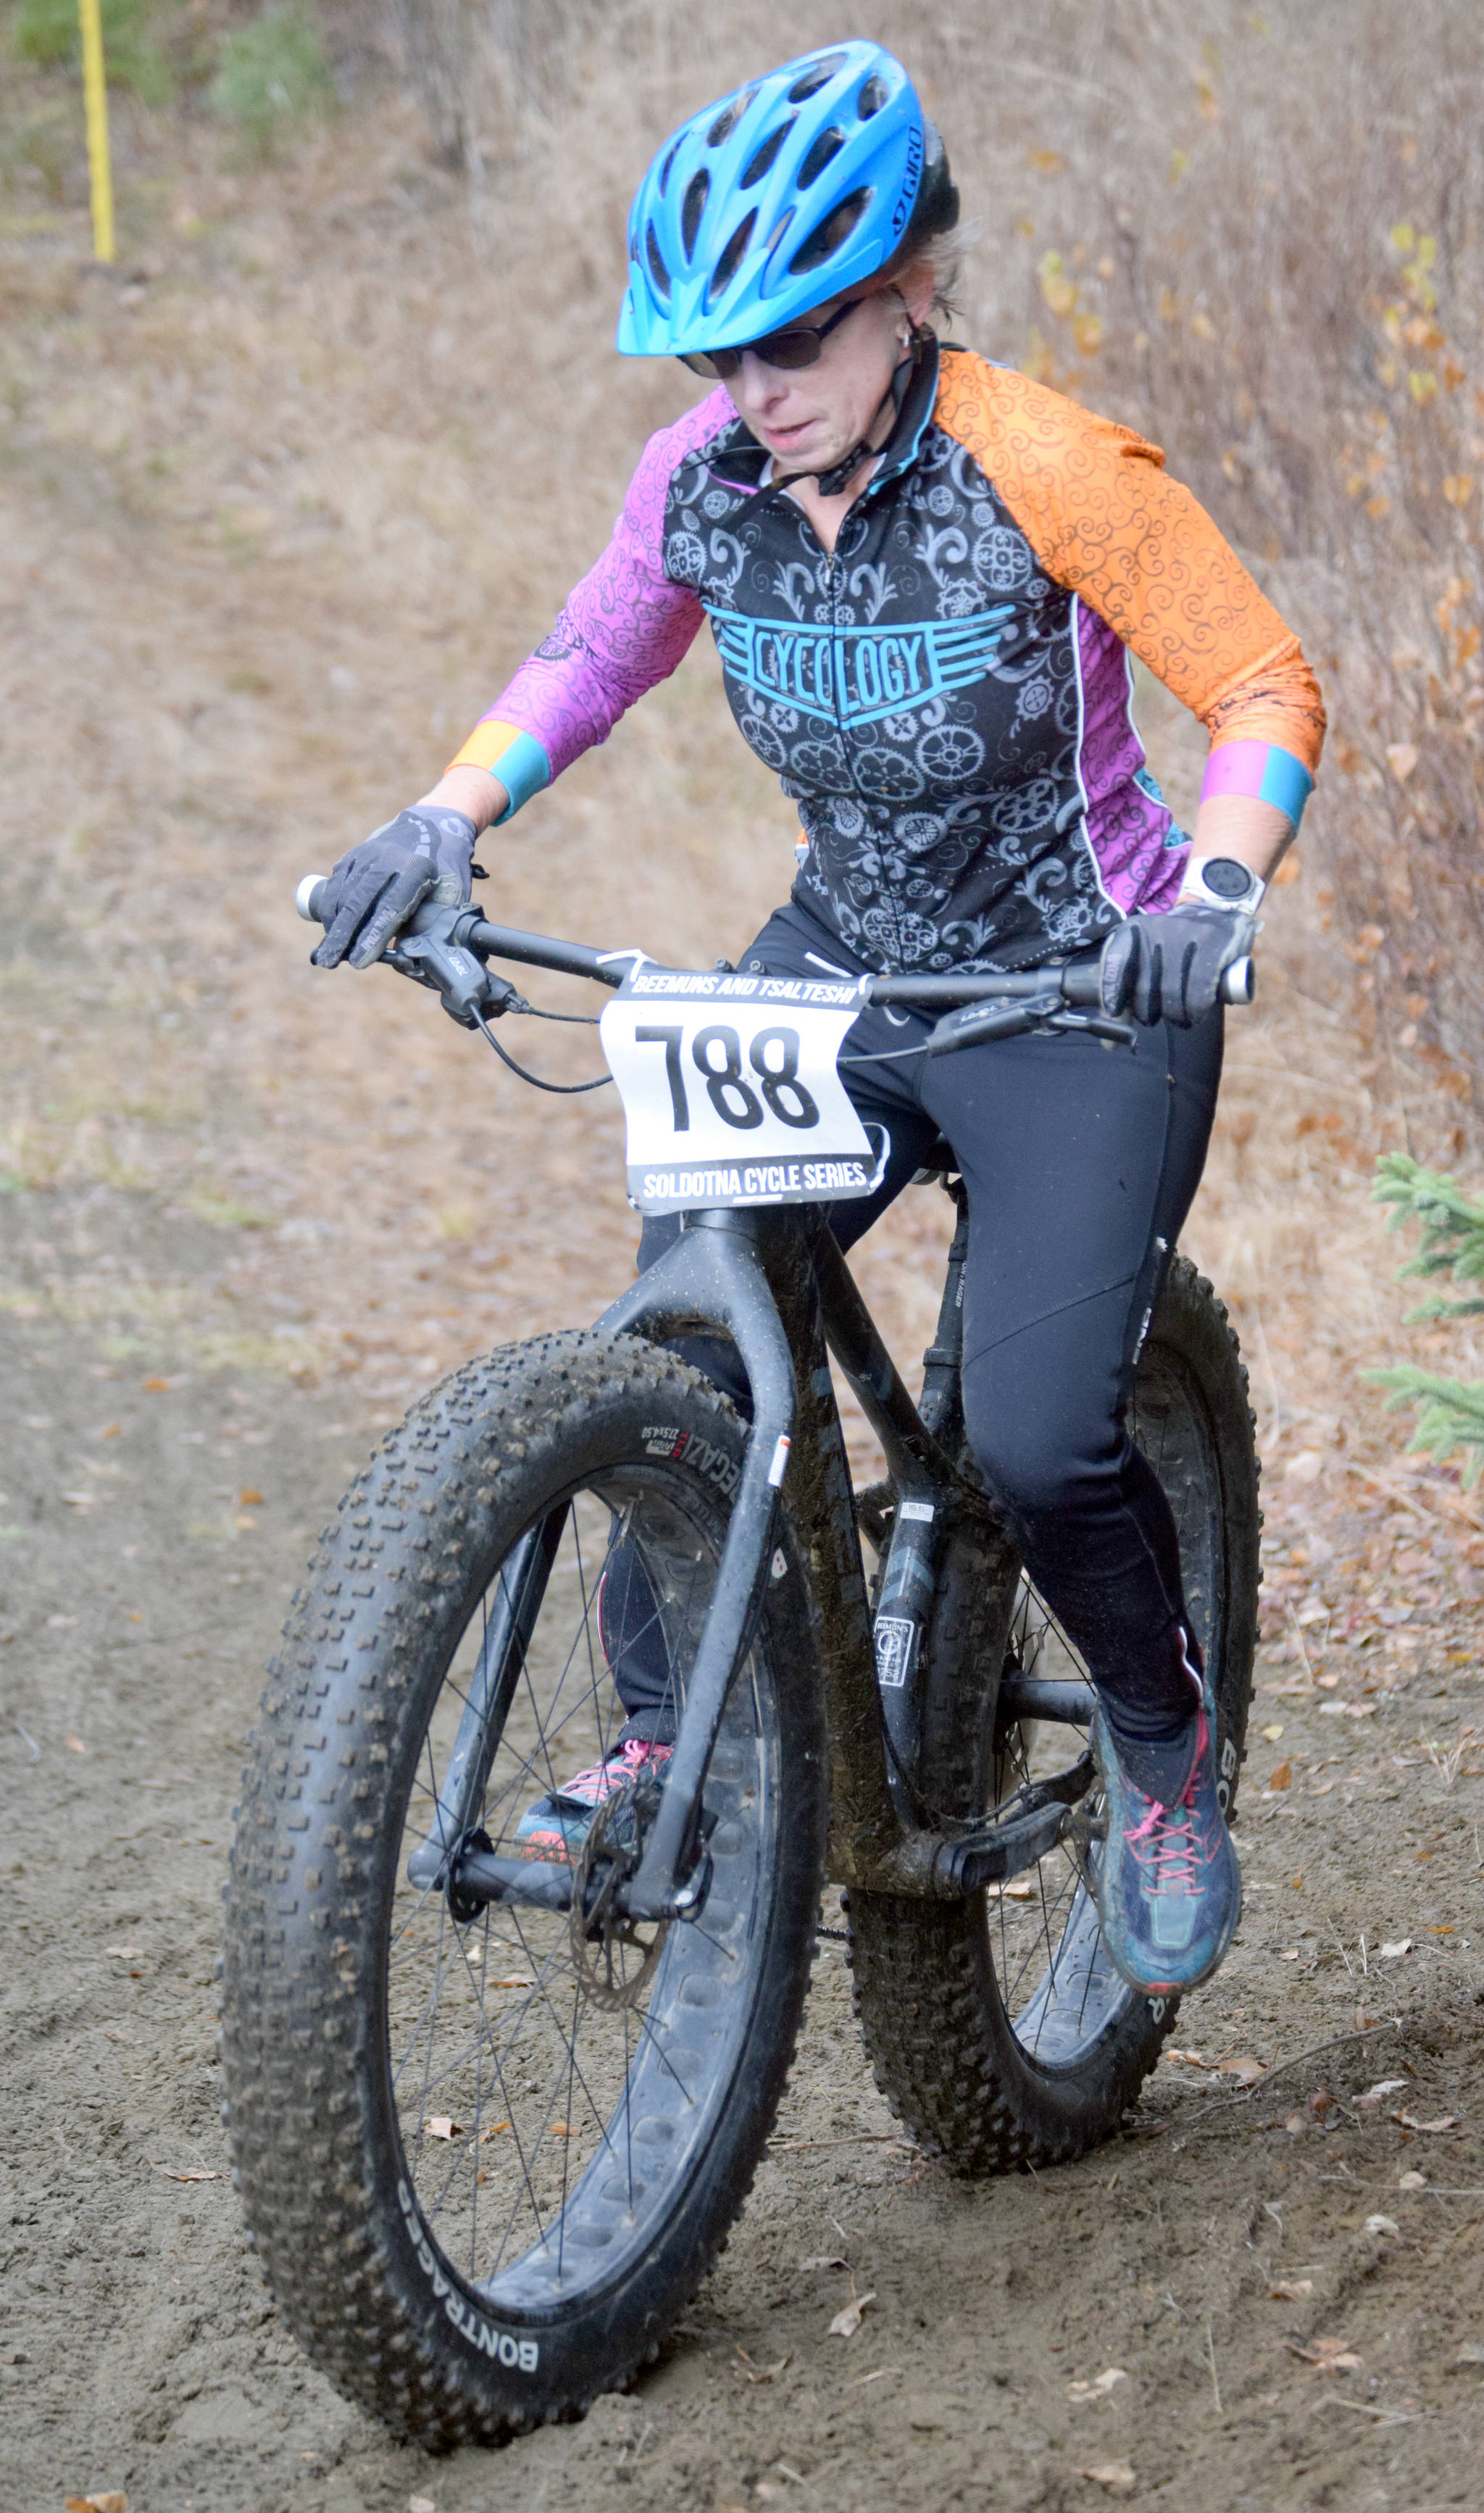 Soldotna’s Patty Moran rides to a state championship in women’s masters 55-plus at the Alaska Cyclocross State Championships on Saturday, Oct. 19, 2019, at Tsalteshi Trails near Soldotna, Alaska. (Photo by Jeff Helminiak/Peninsula Clarion)